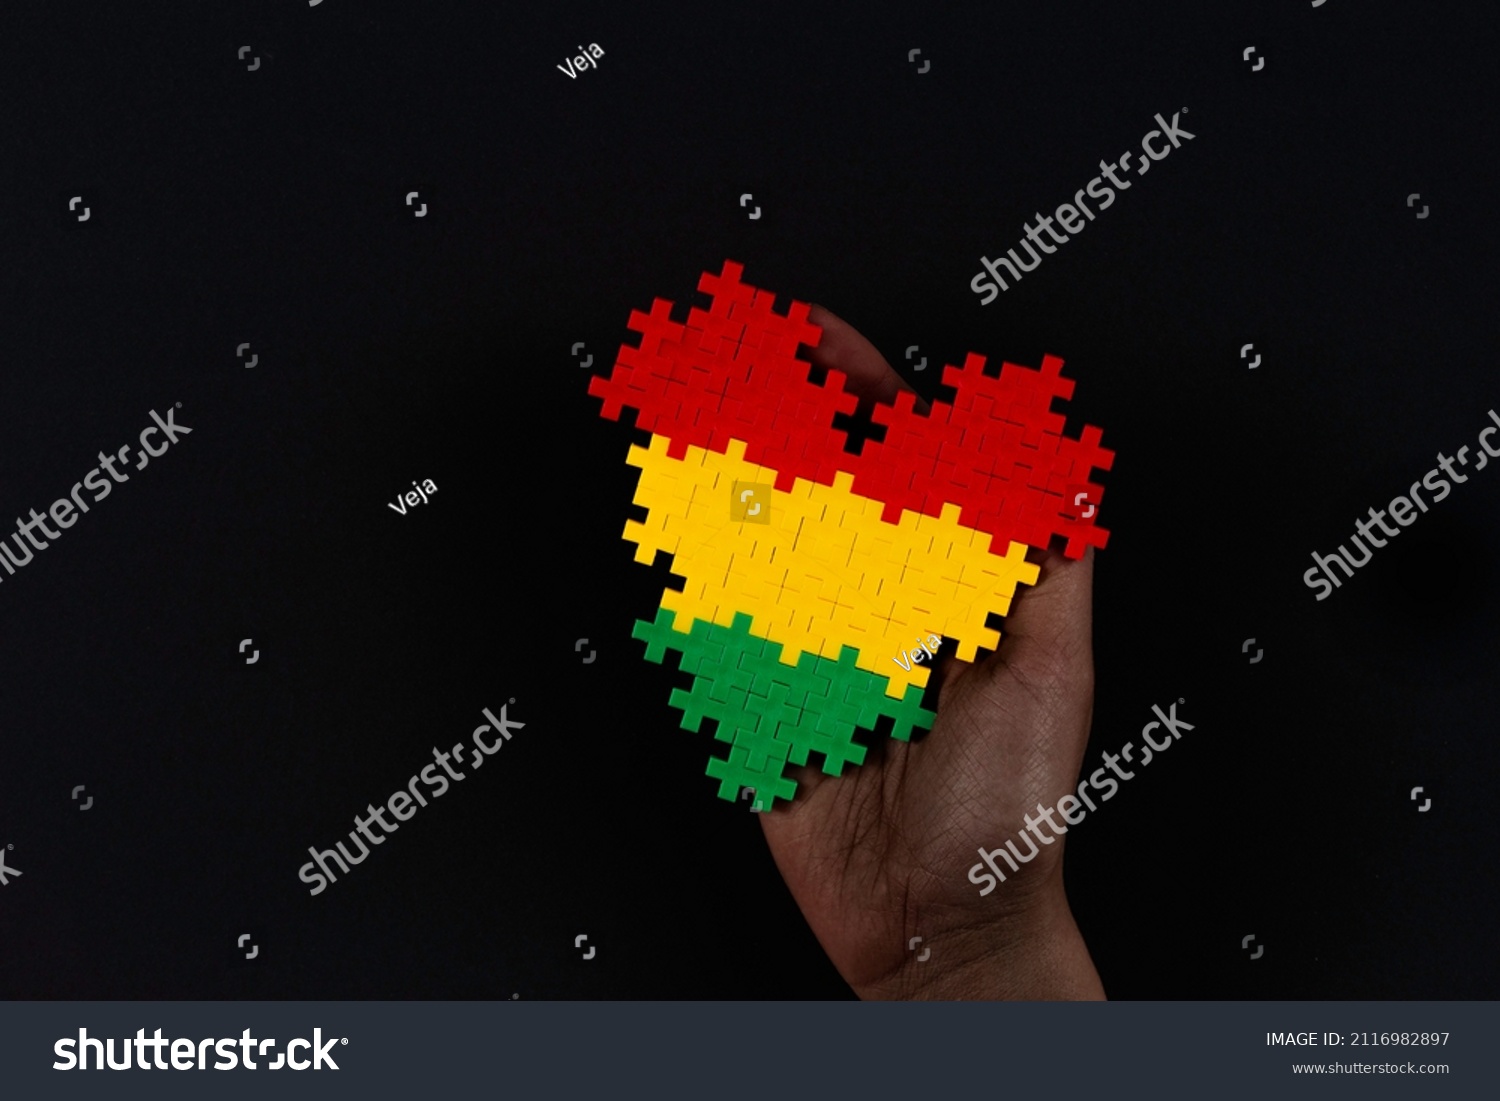 Black History Month background. African American history month celebration. Hand holding heart in red, yellow, green colors flag over black background #2116982897